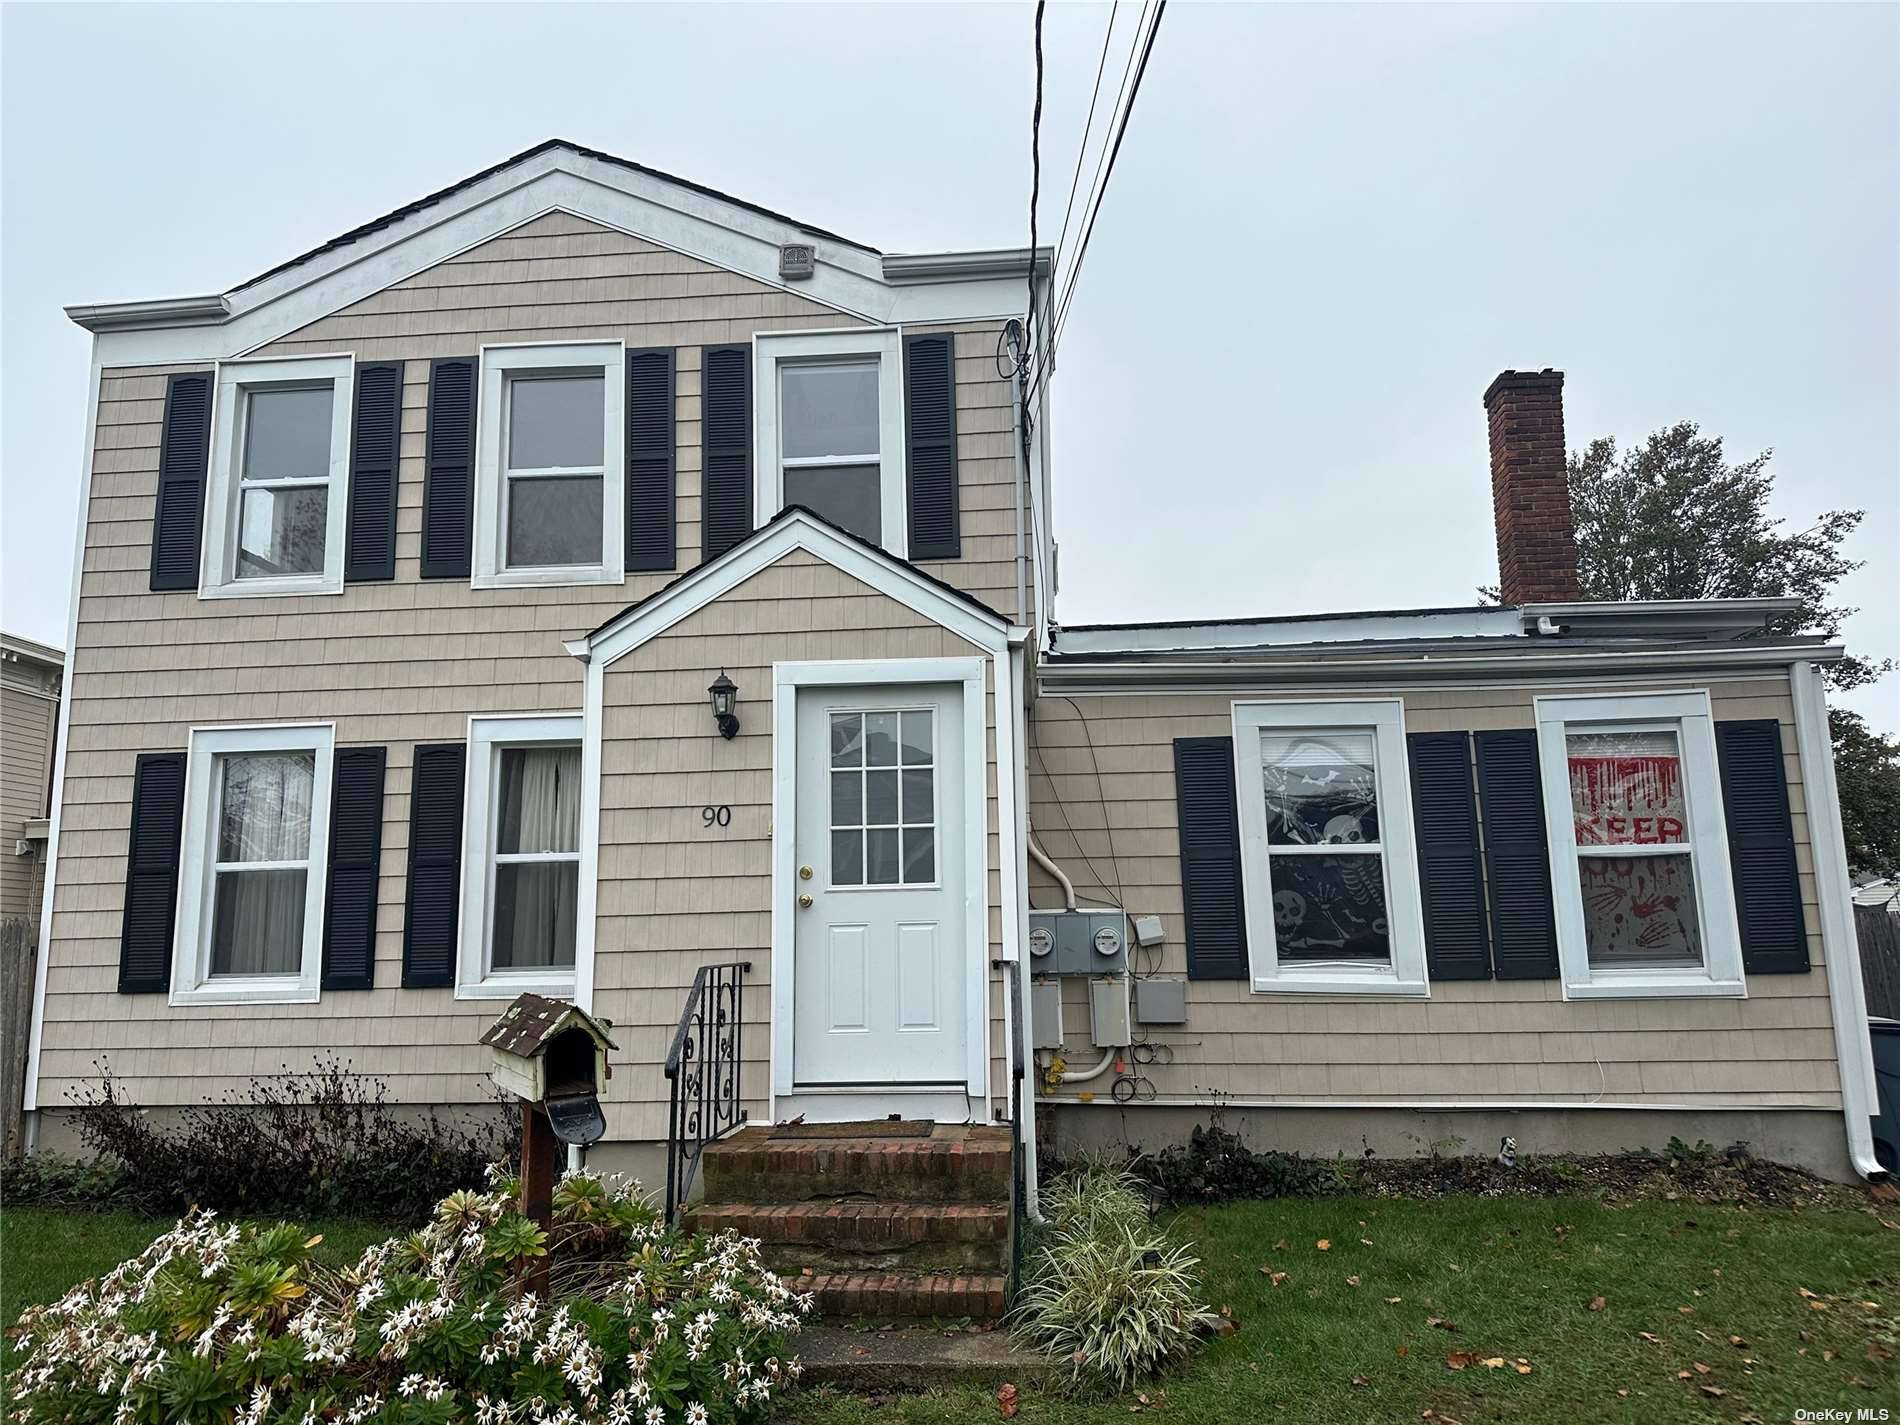 Don't miss out on this 4 bedroom 2 bath house located in the heart of Islip close to all